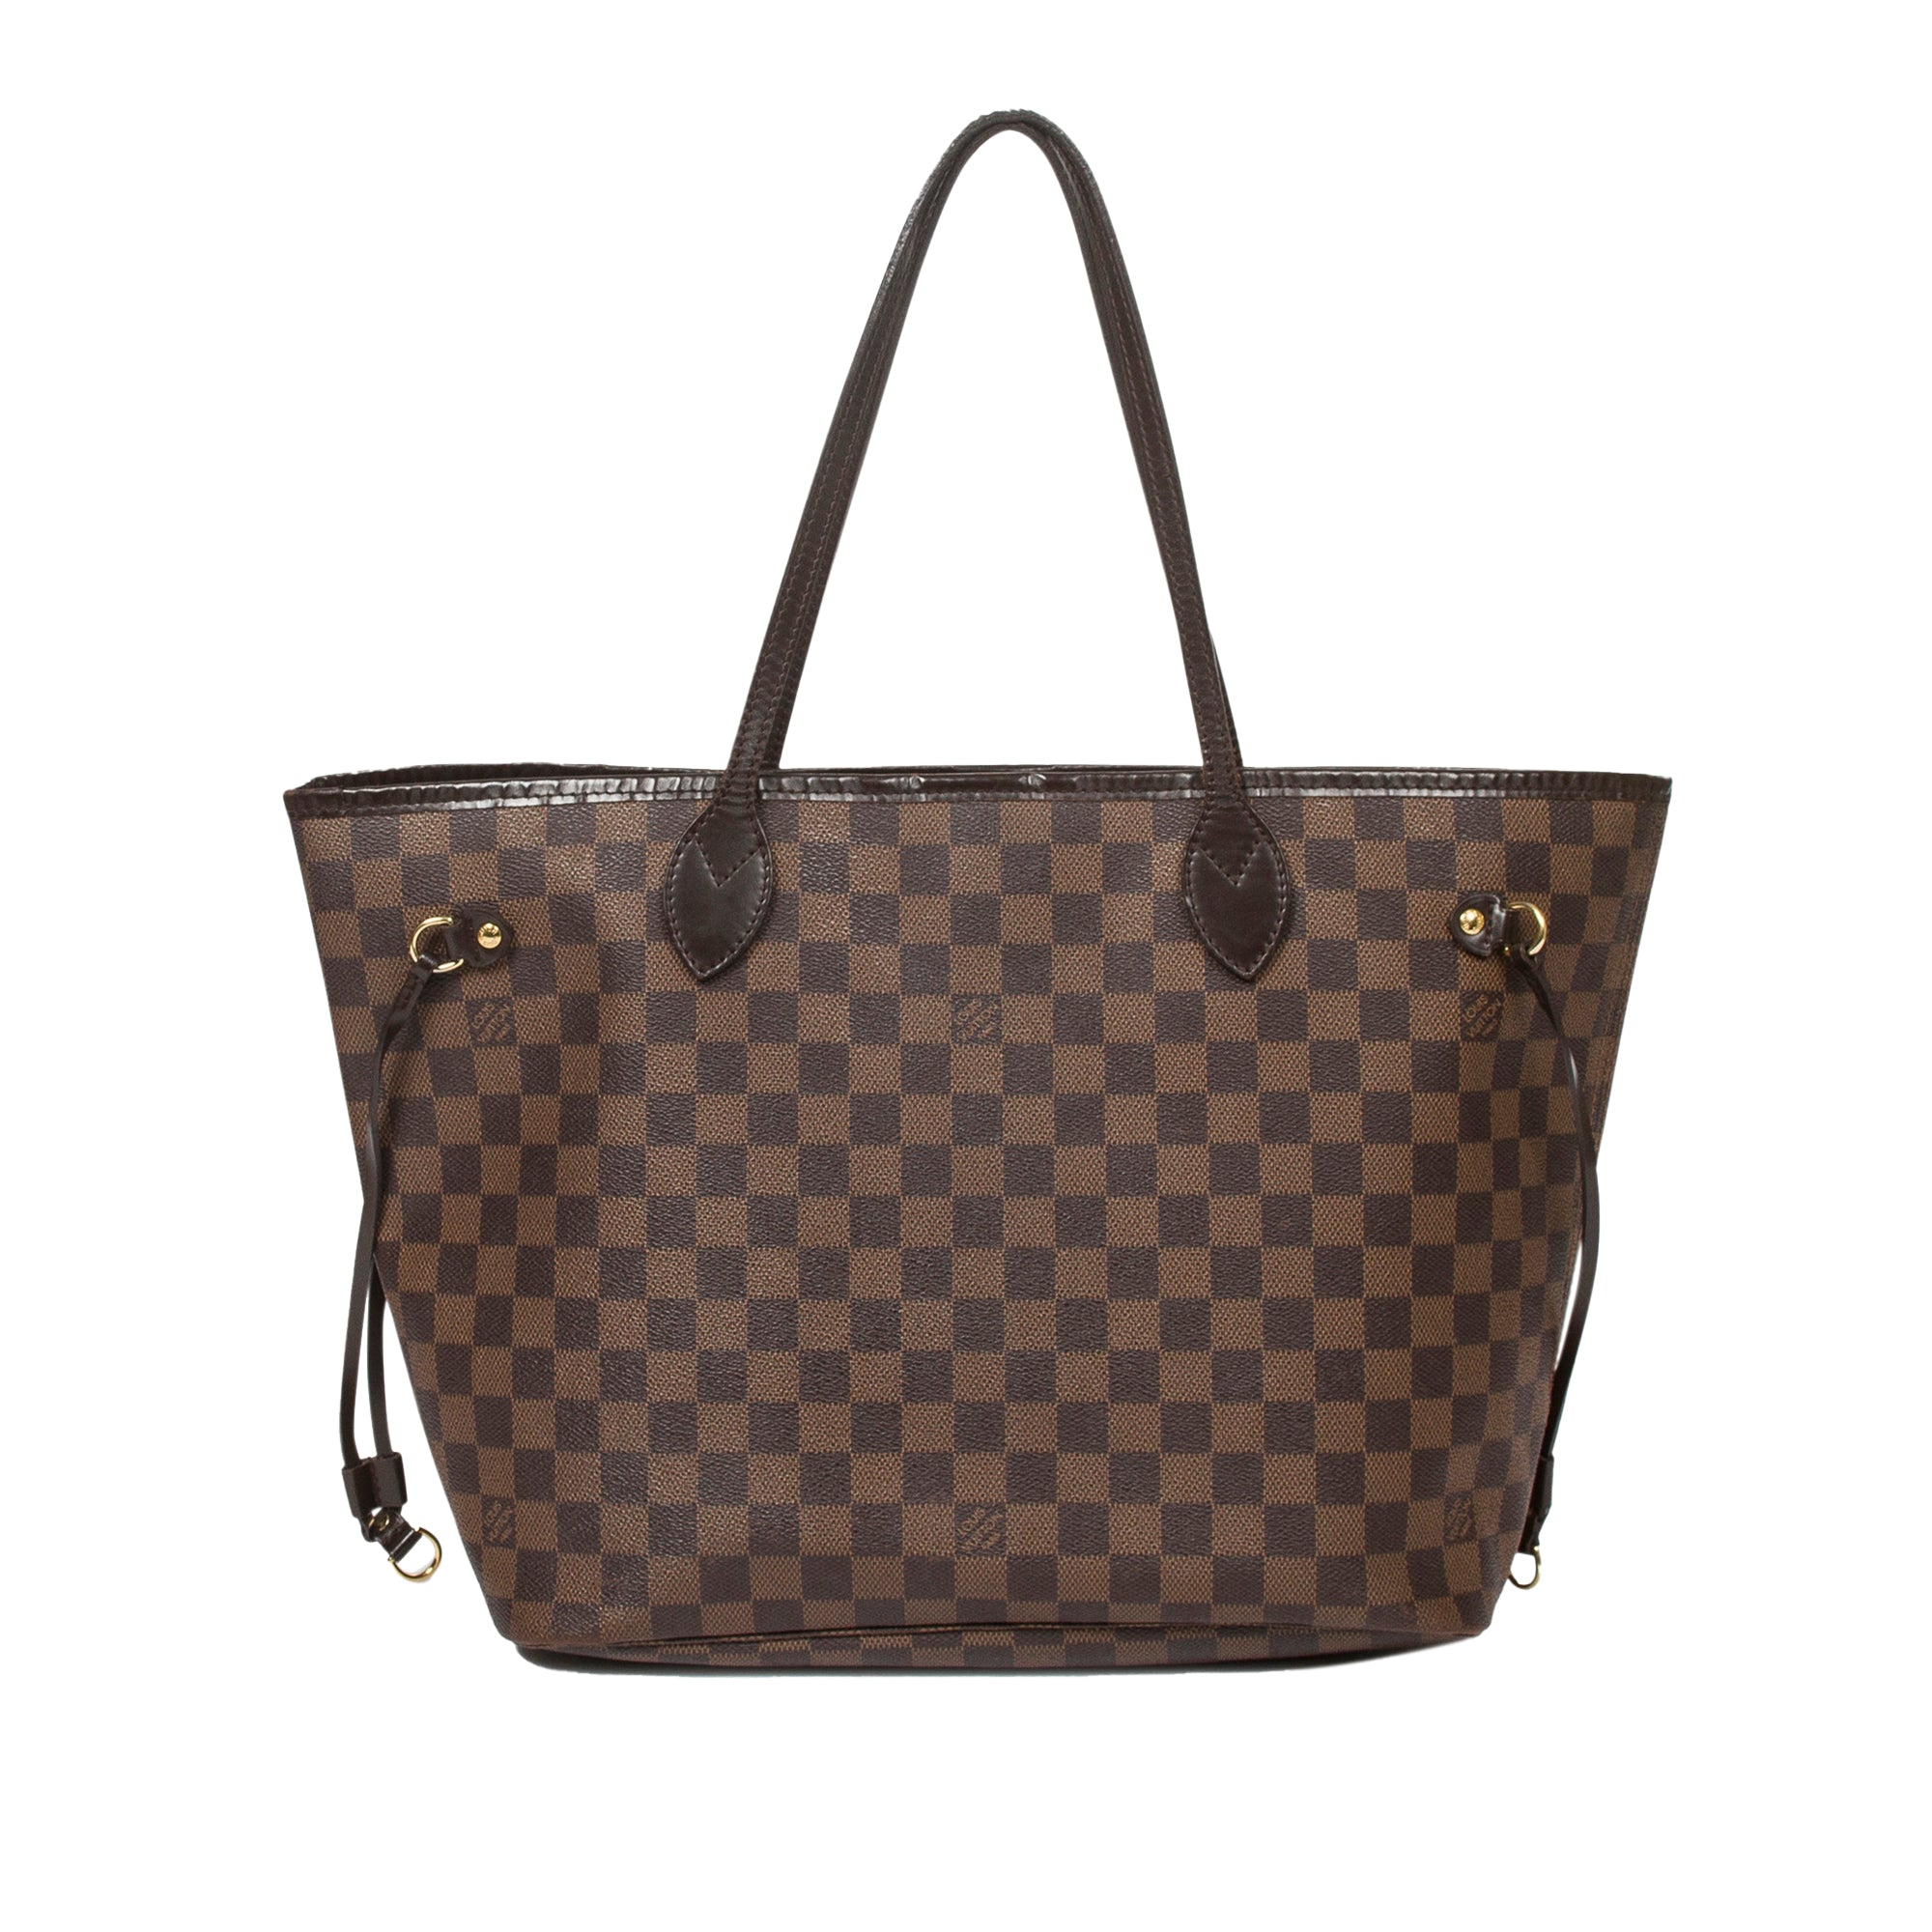 LV Neverfull MM pouch converted to crossbody/shoulder pouch 